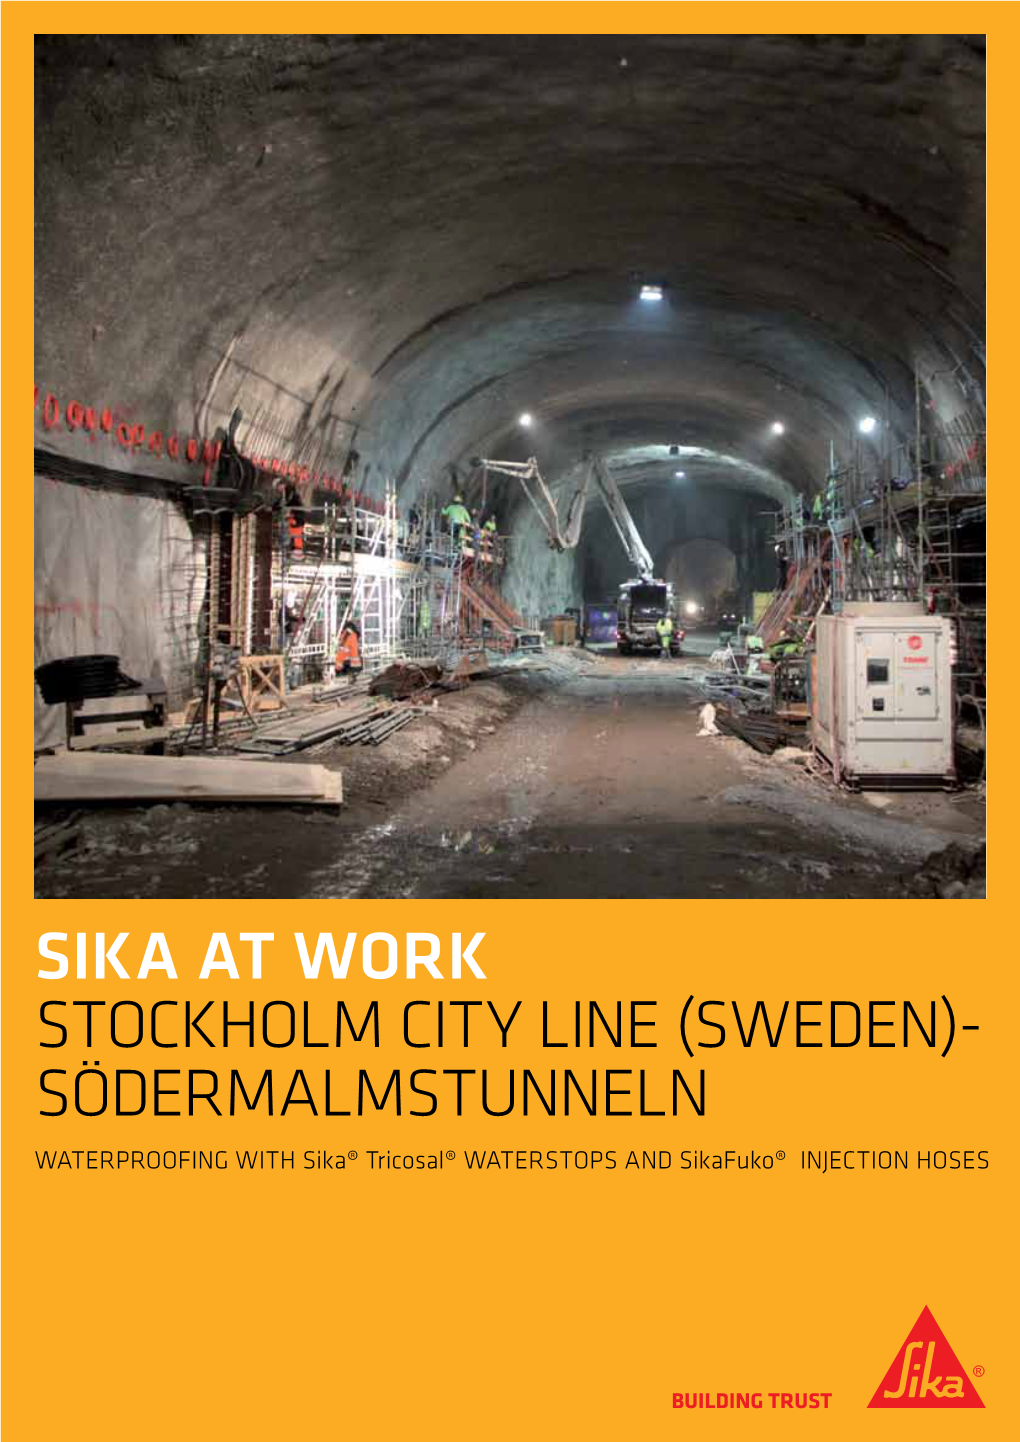 Stockholm City Line (Sweden)- Södermalmstunneln Waterproofing with Sika® Tricosal® Waterstops and Sikafuko® Injection Hoses City Line Stockholm